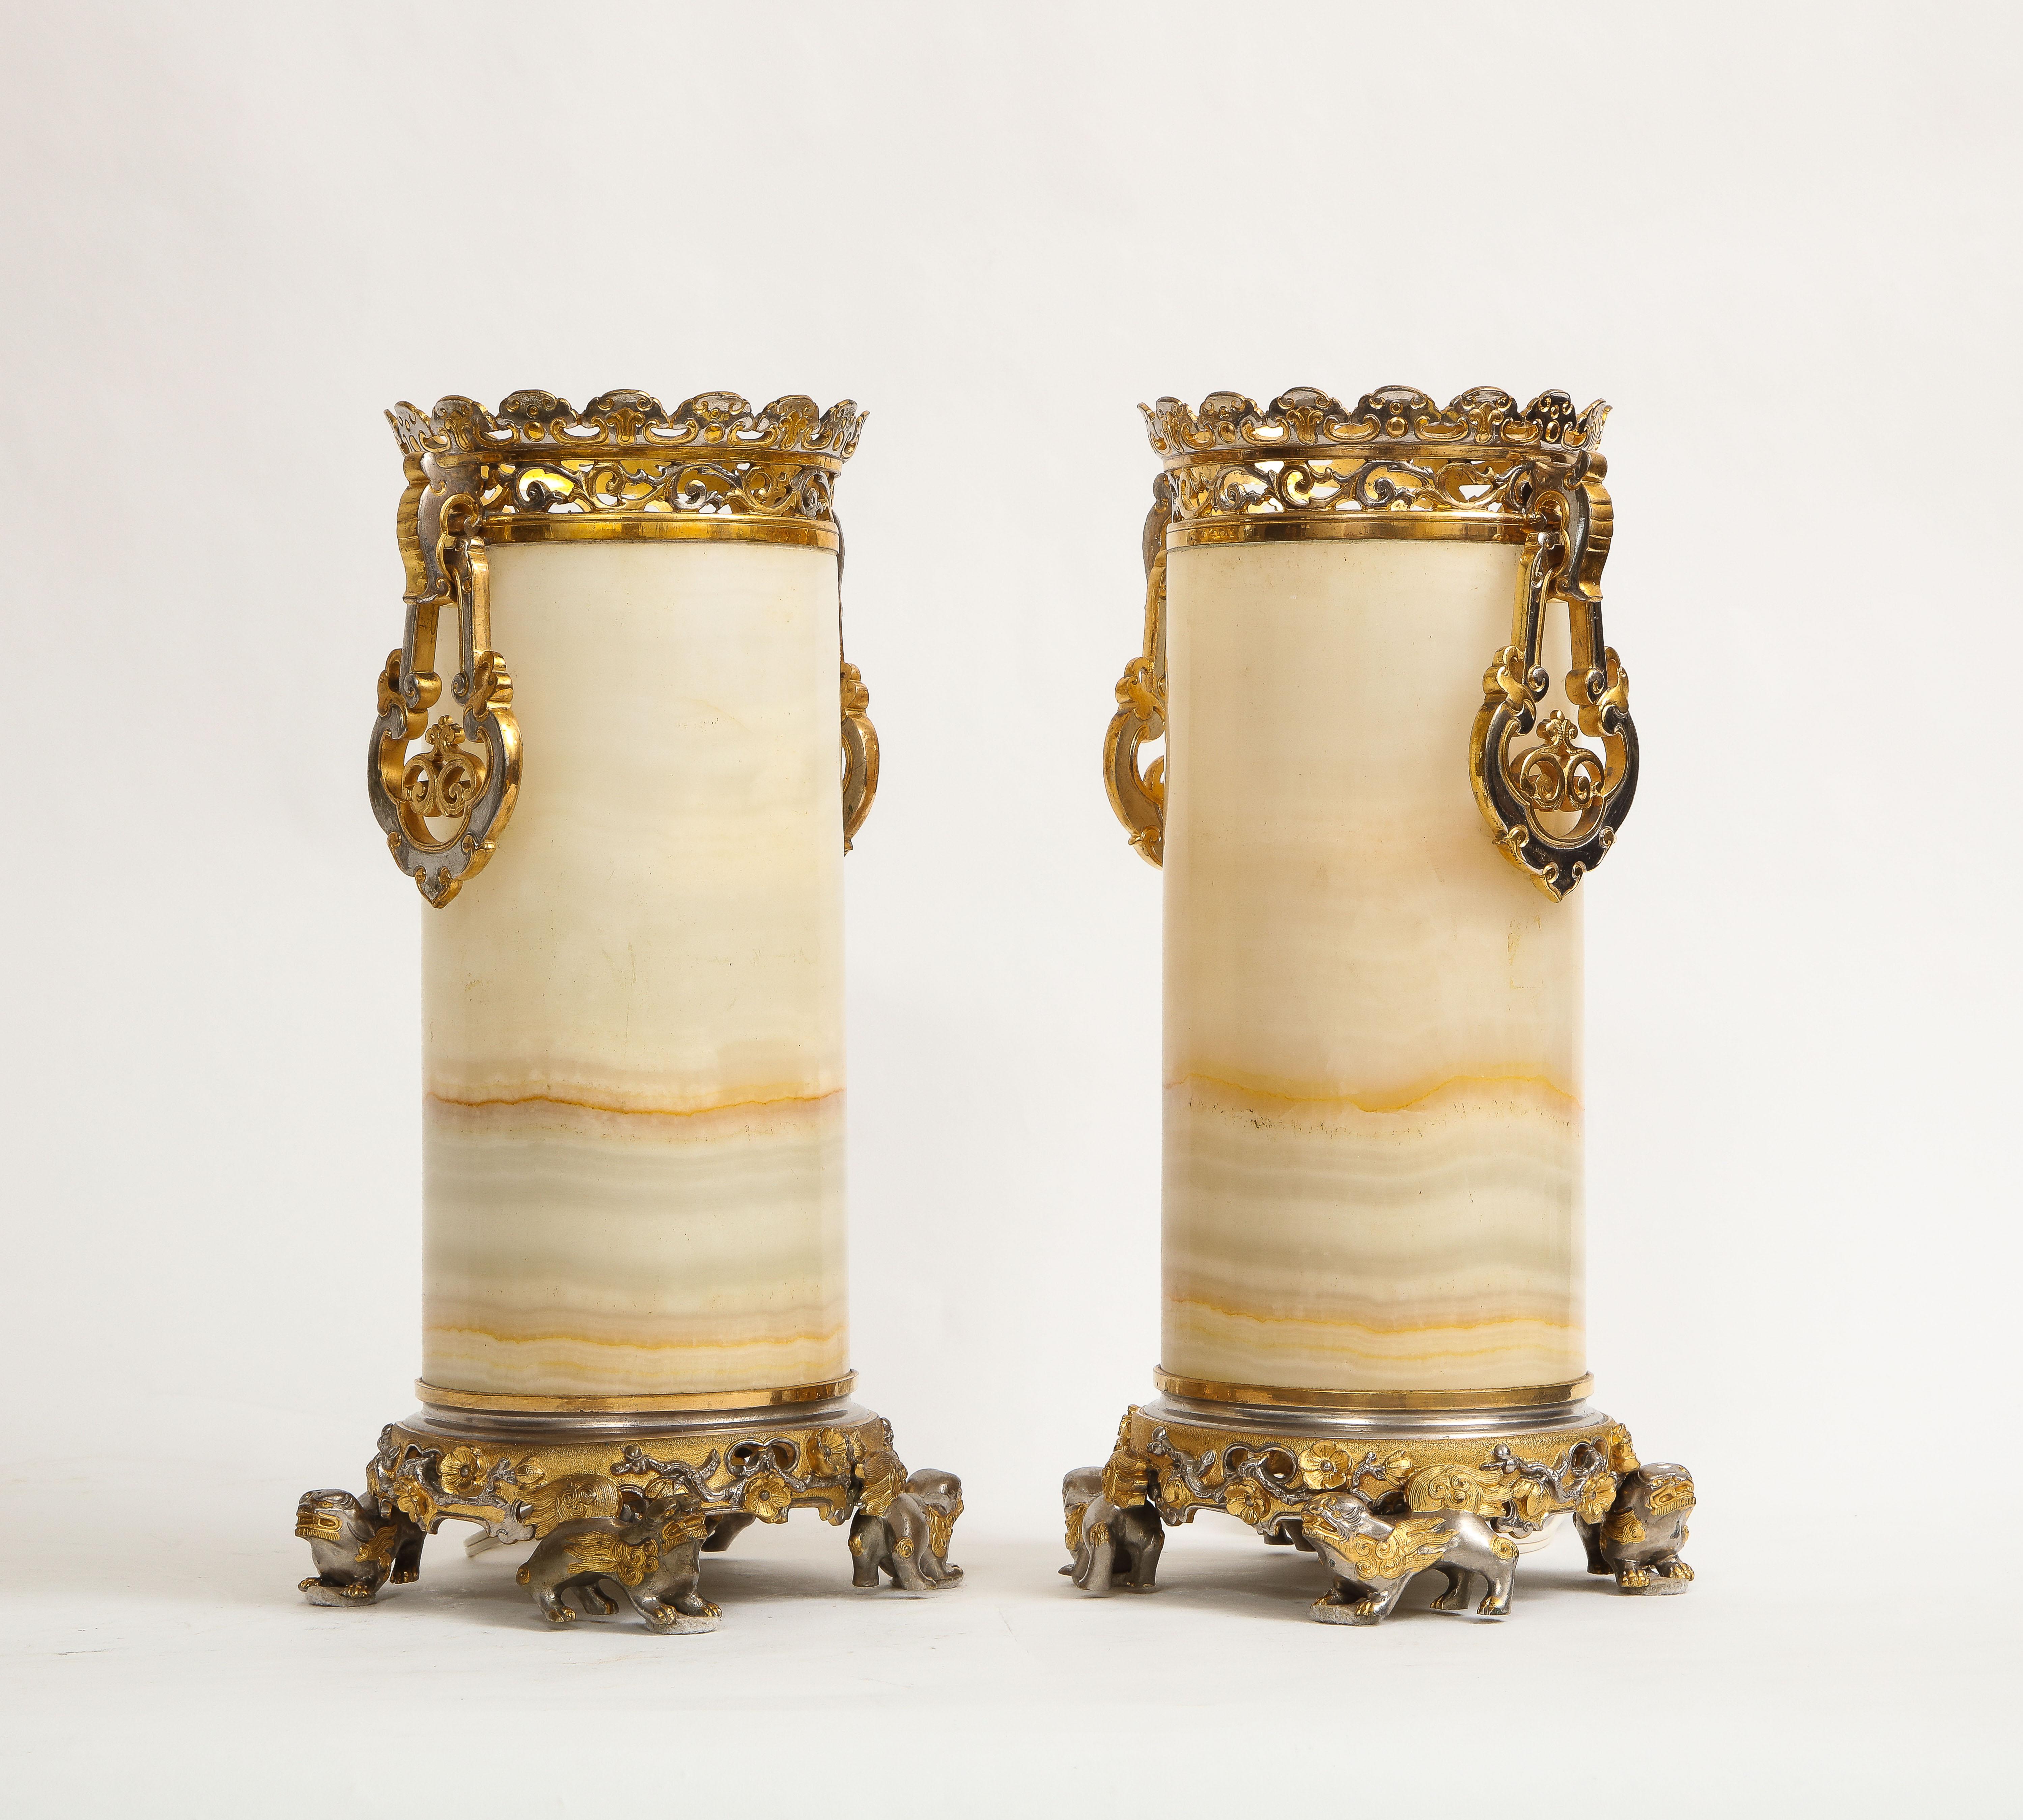 Late 19th Century Pr French Chinoiserie Silvered & Dore Bronze Mounted Honey Alabaster Vases/Lamps For Sale